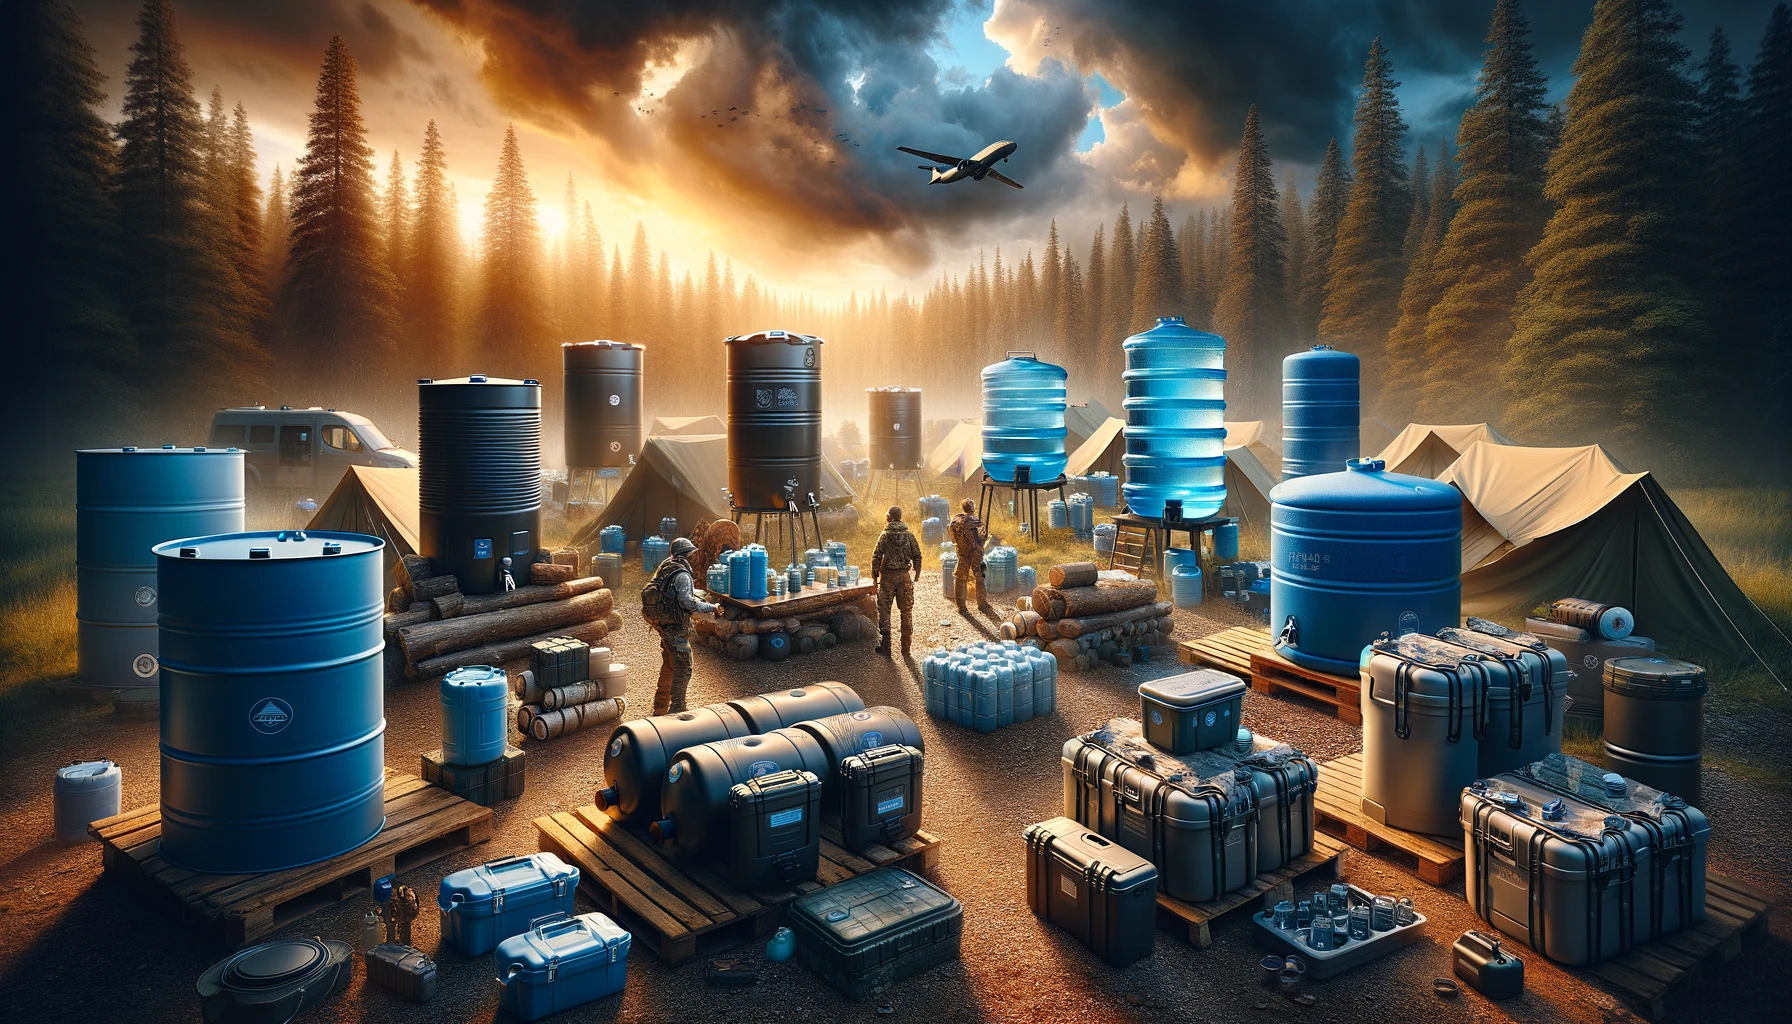 Dynamic outdoor survival camp scene with experts evaluating a range of water storage containers for long-term use, from heavy-duty barrels to stainless steel tanks and collapsible units, against the backdrop of a wilderness at sunset, emphasizing preparation and self-reliance